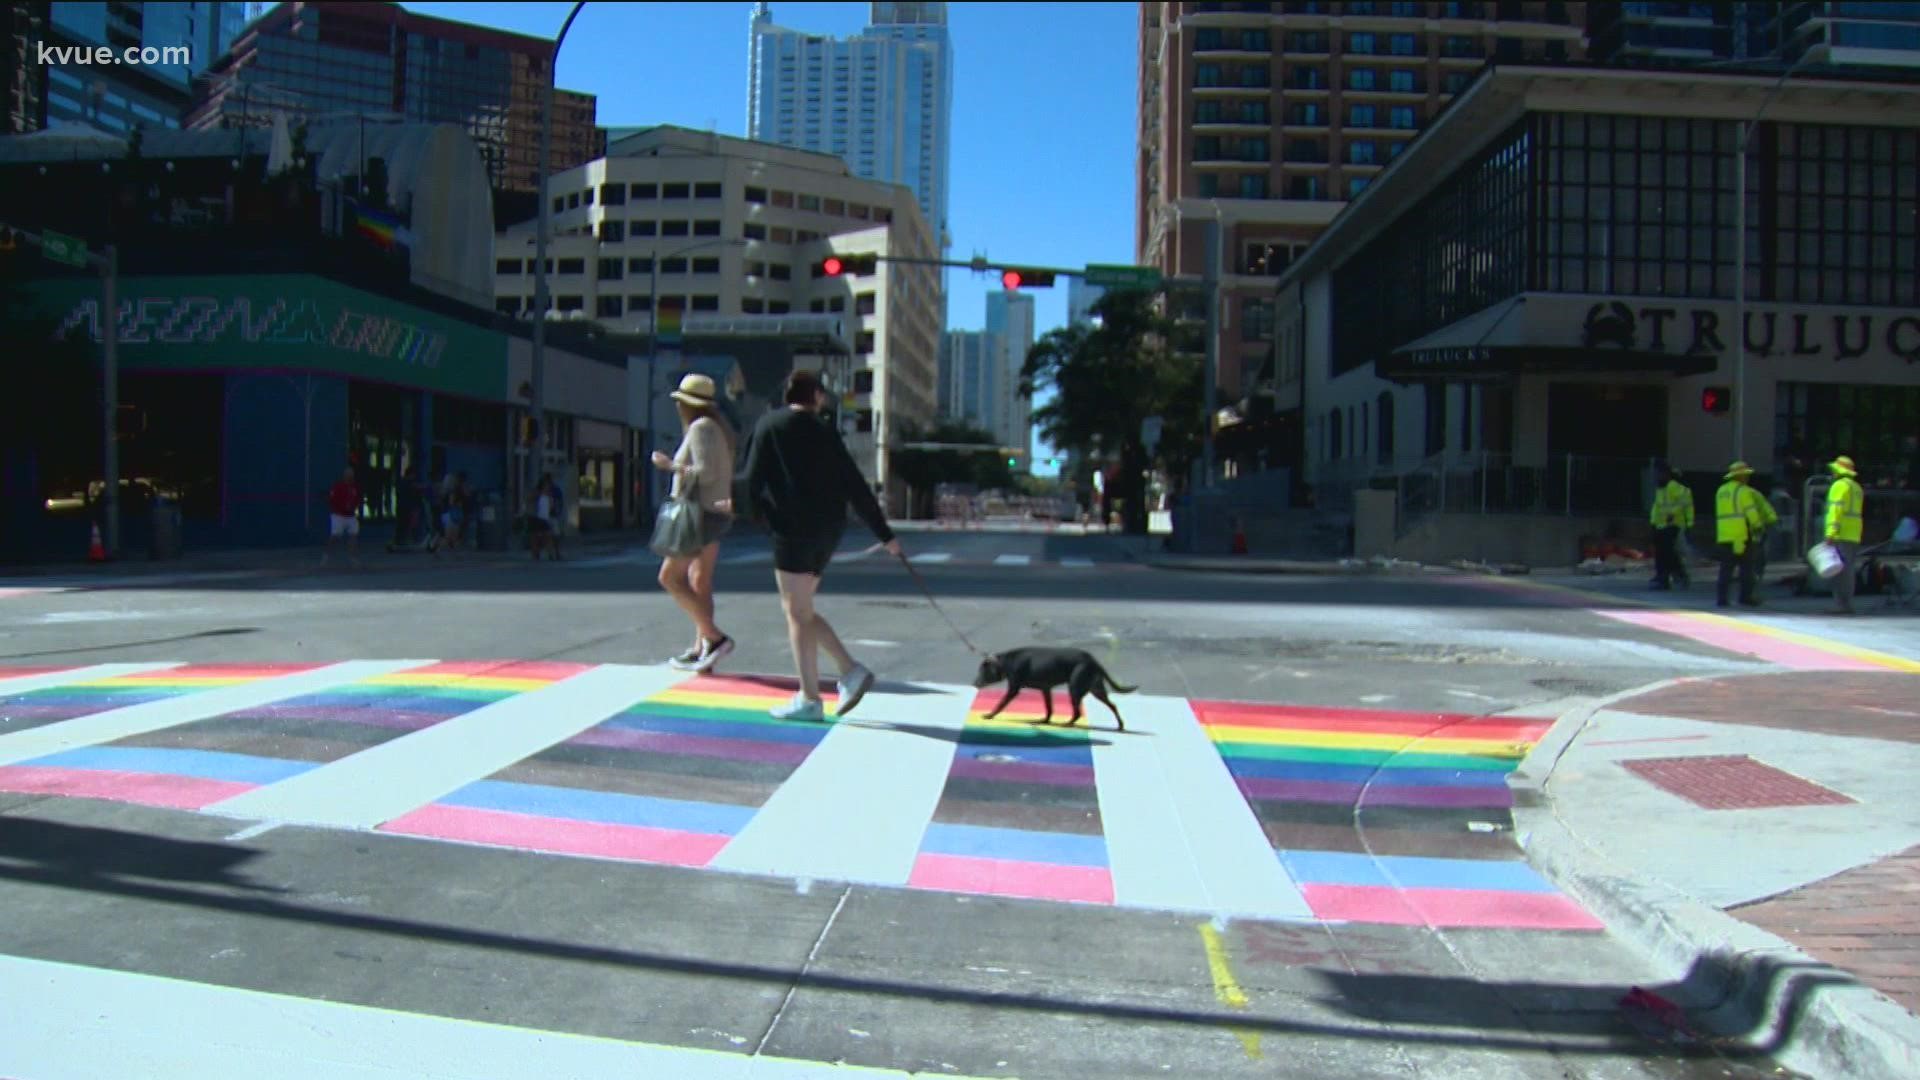 The crosswalks are in honor of National Coming Out Day, Oct. 11.